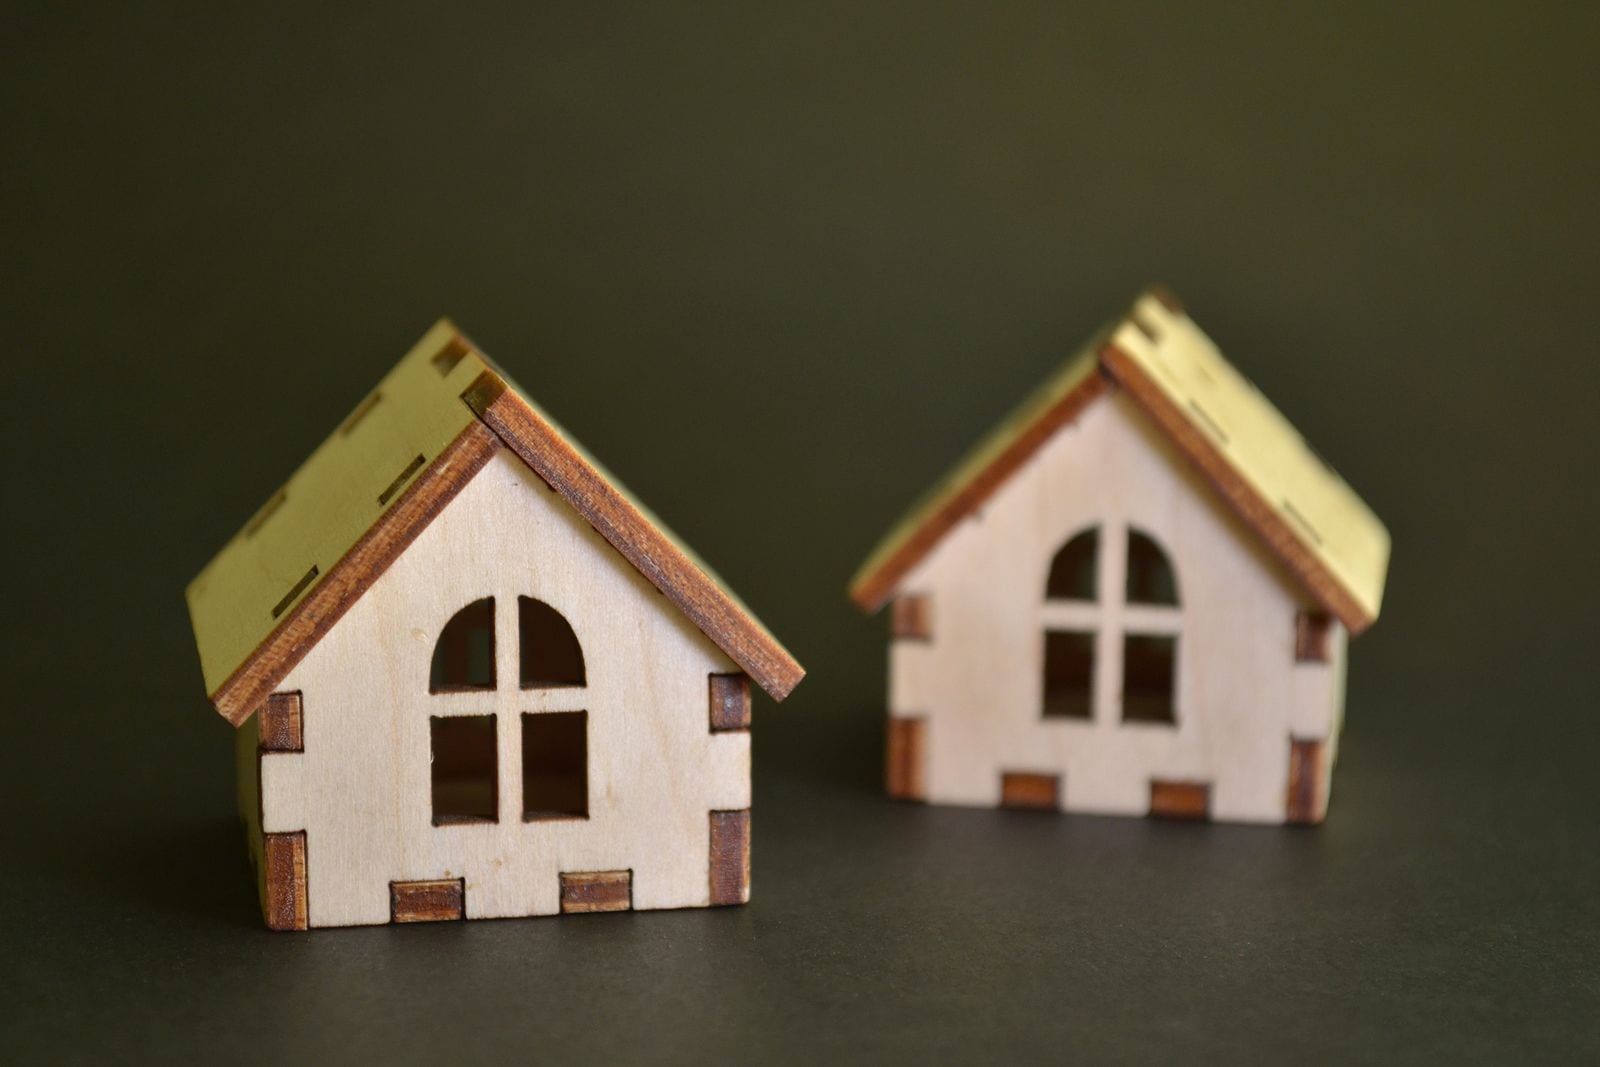 Two wooden mini houses